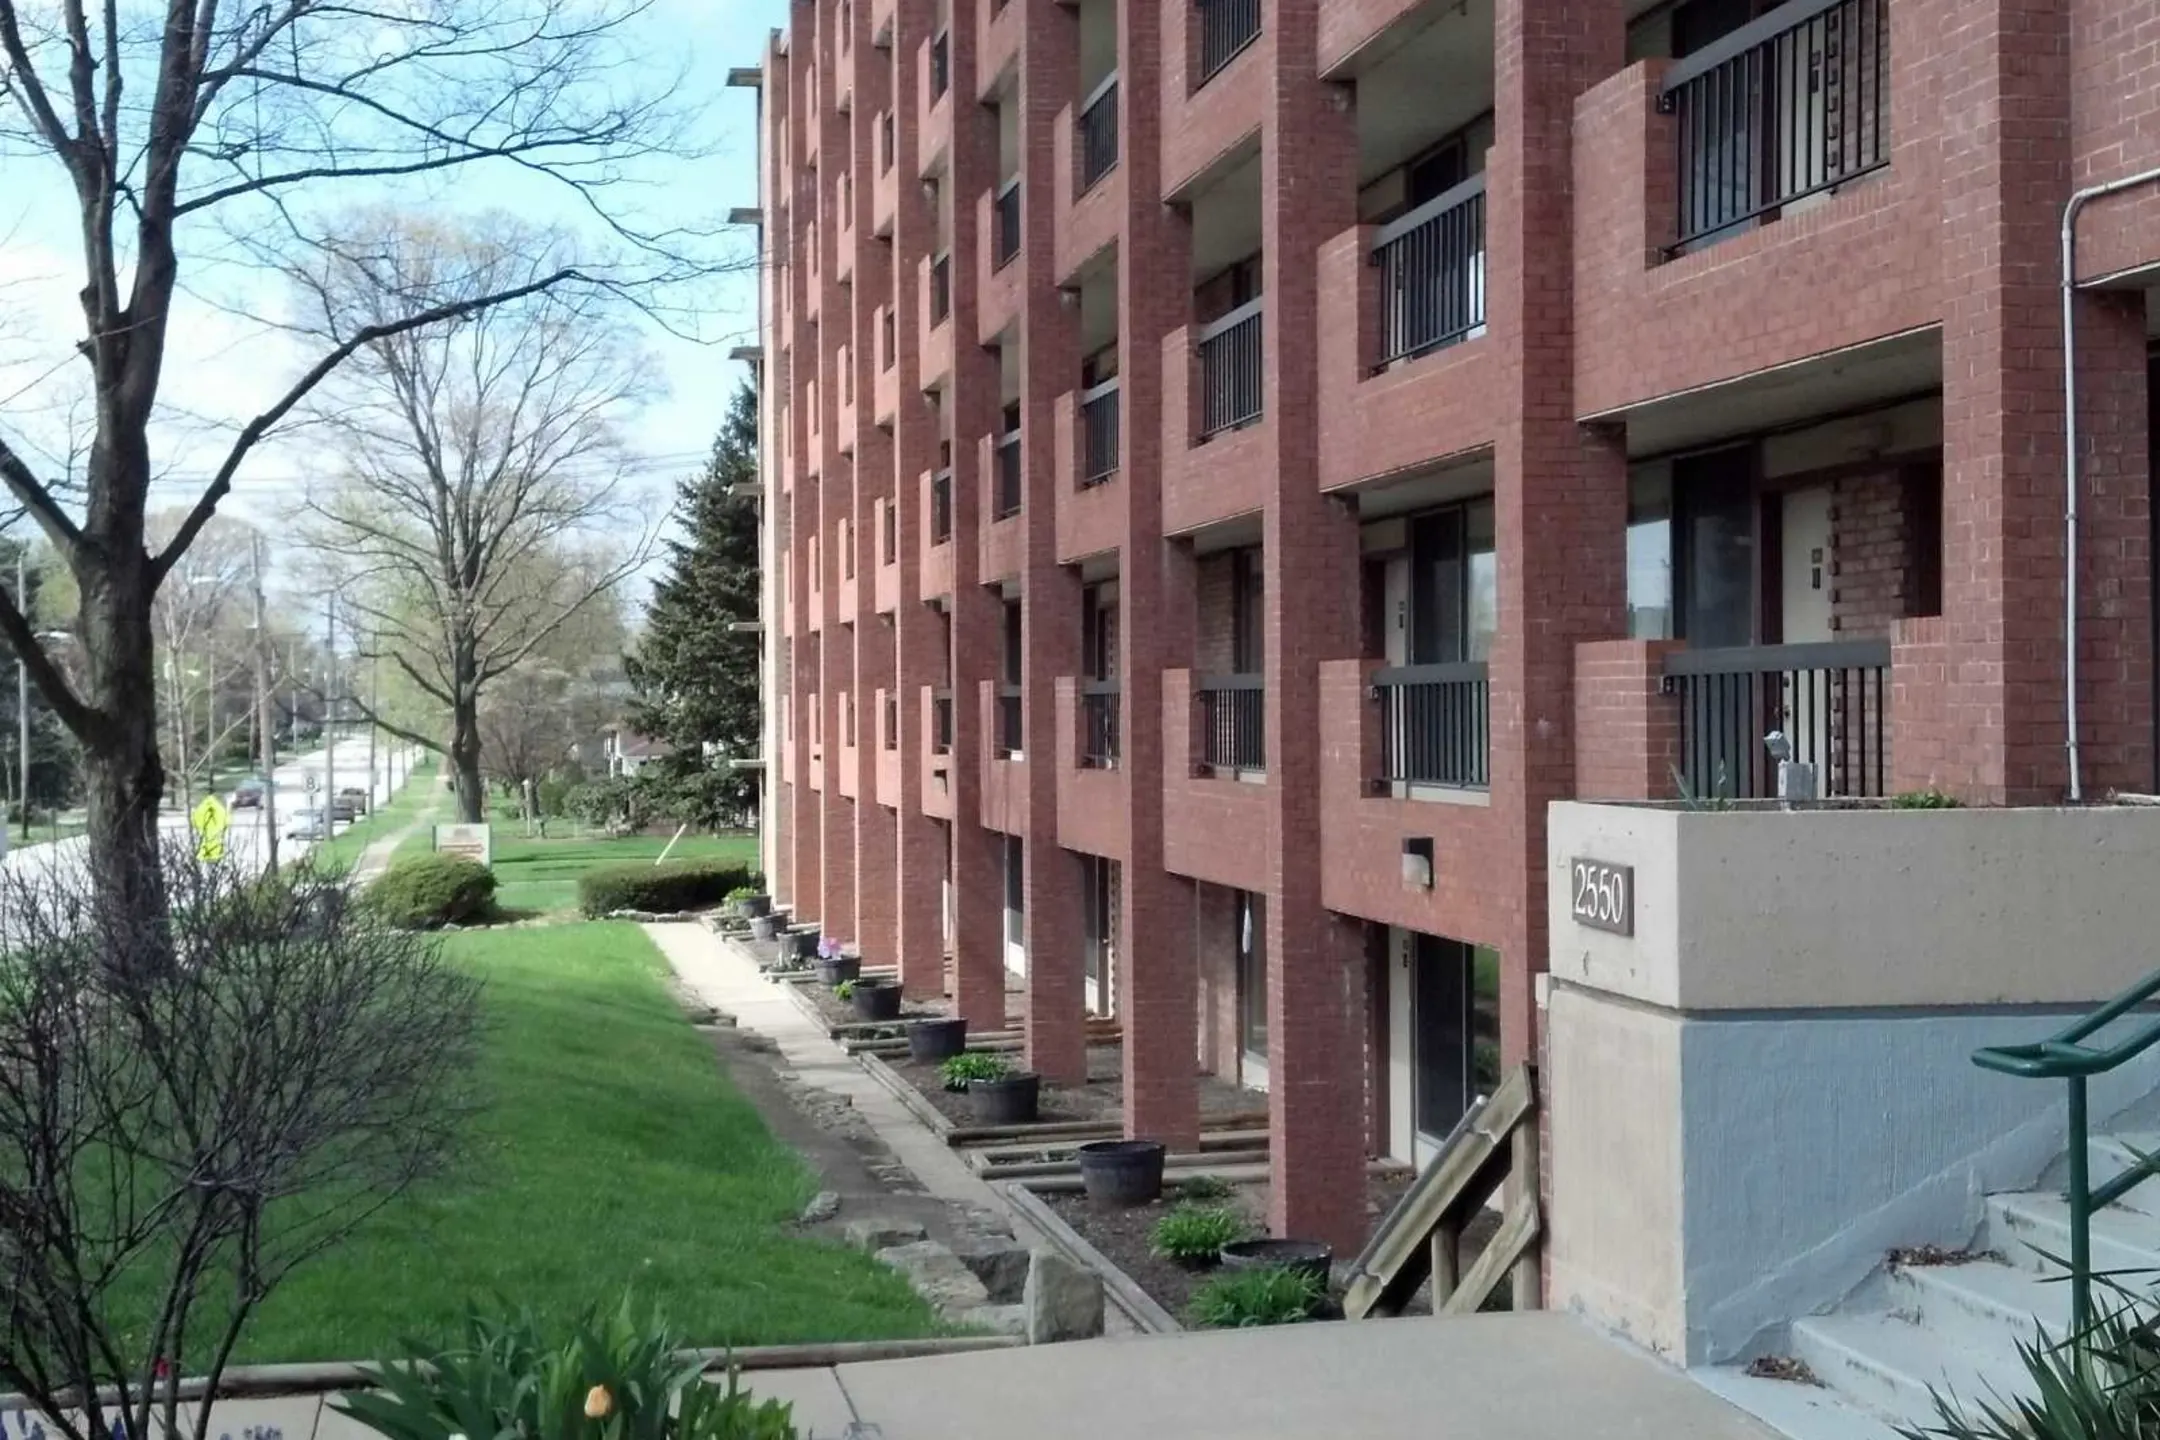 Courtyard - The Apartments on 2nd Street - Cuyahoga Falls, OH